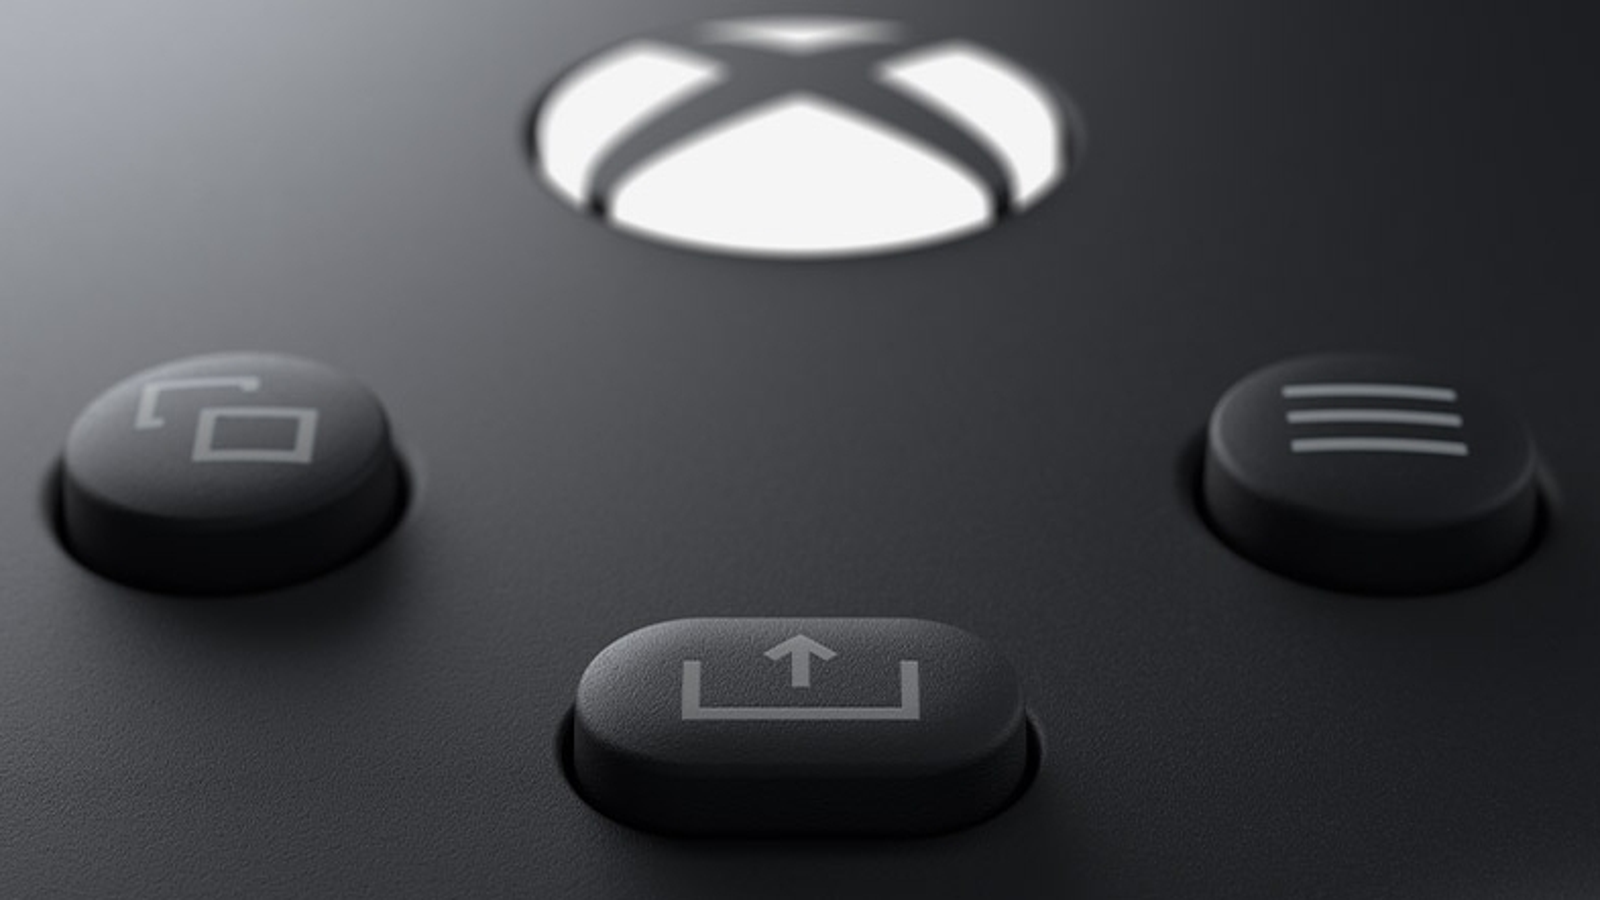 How to record a gameplay video on Xbox One